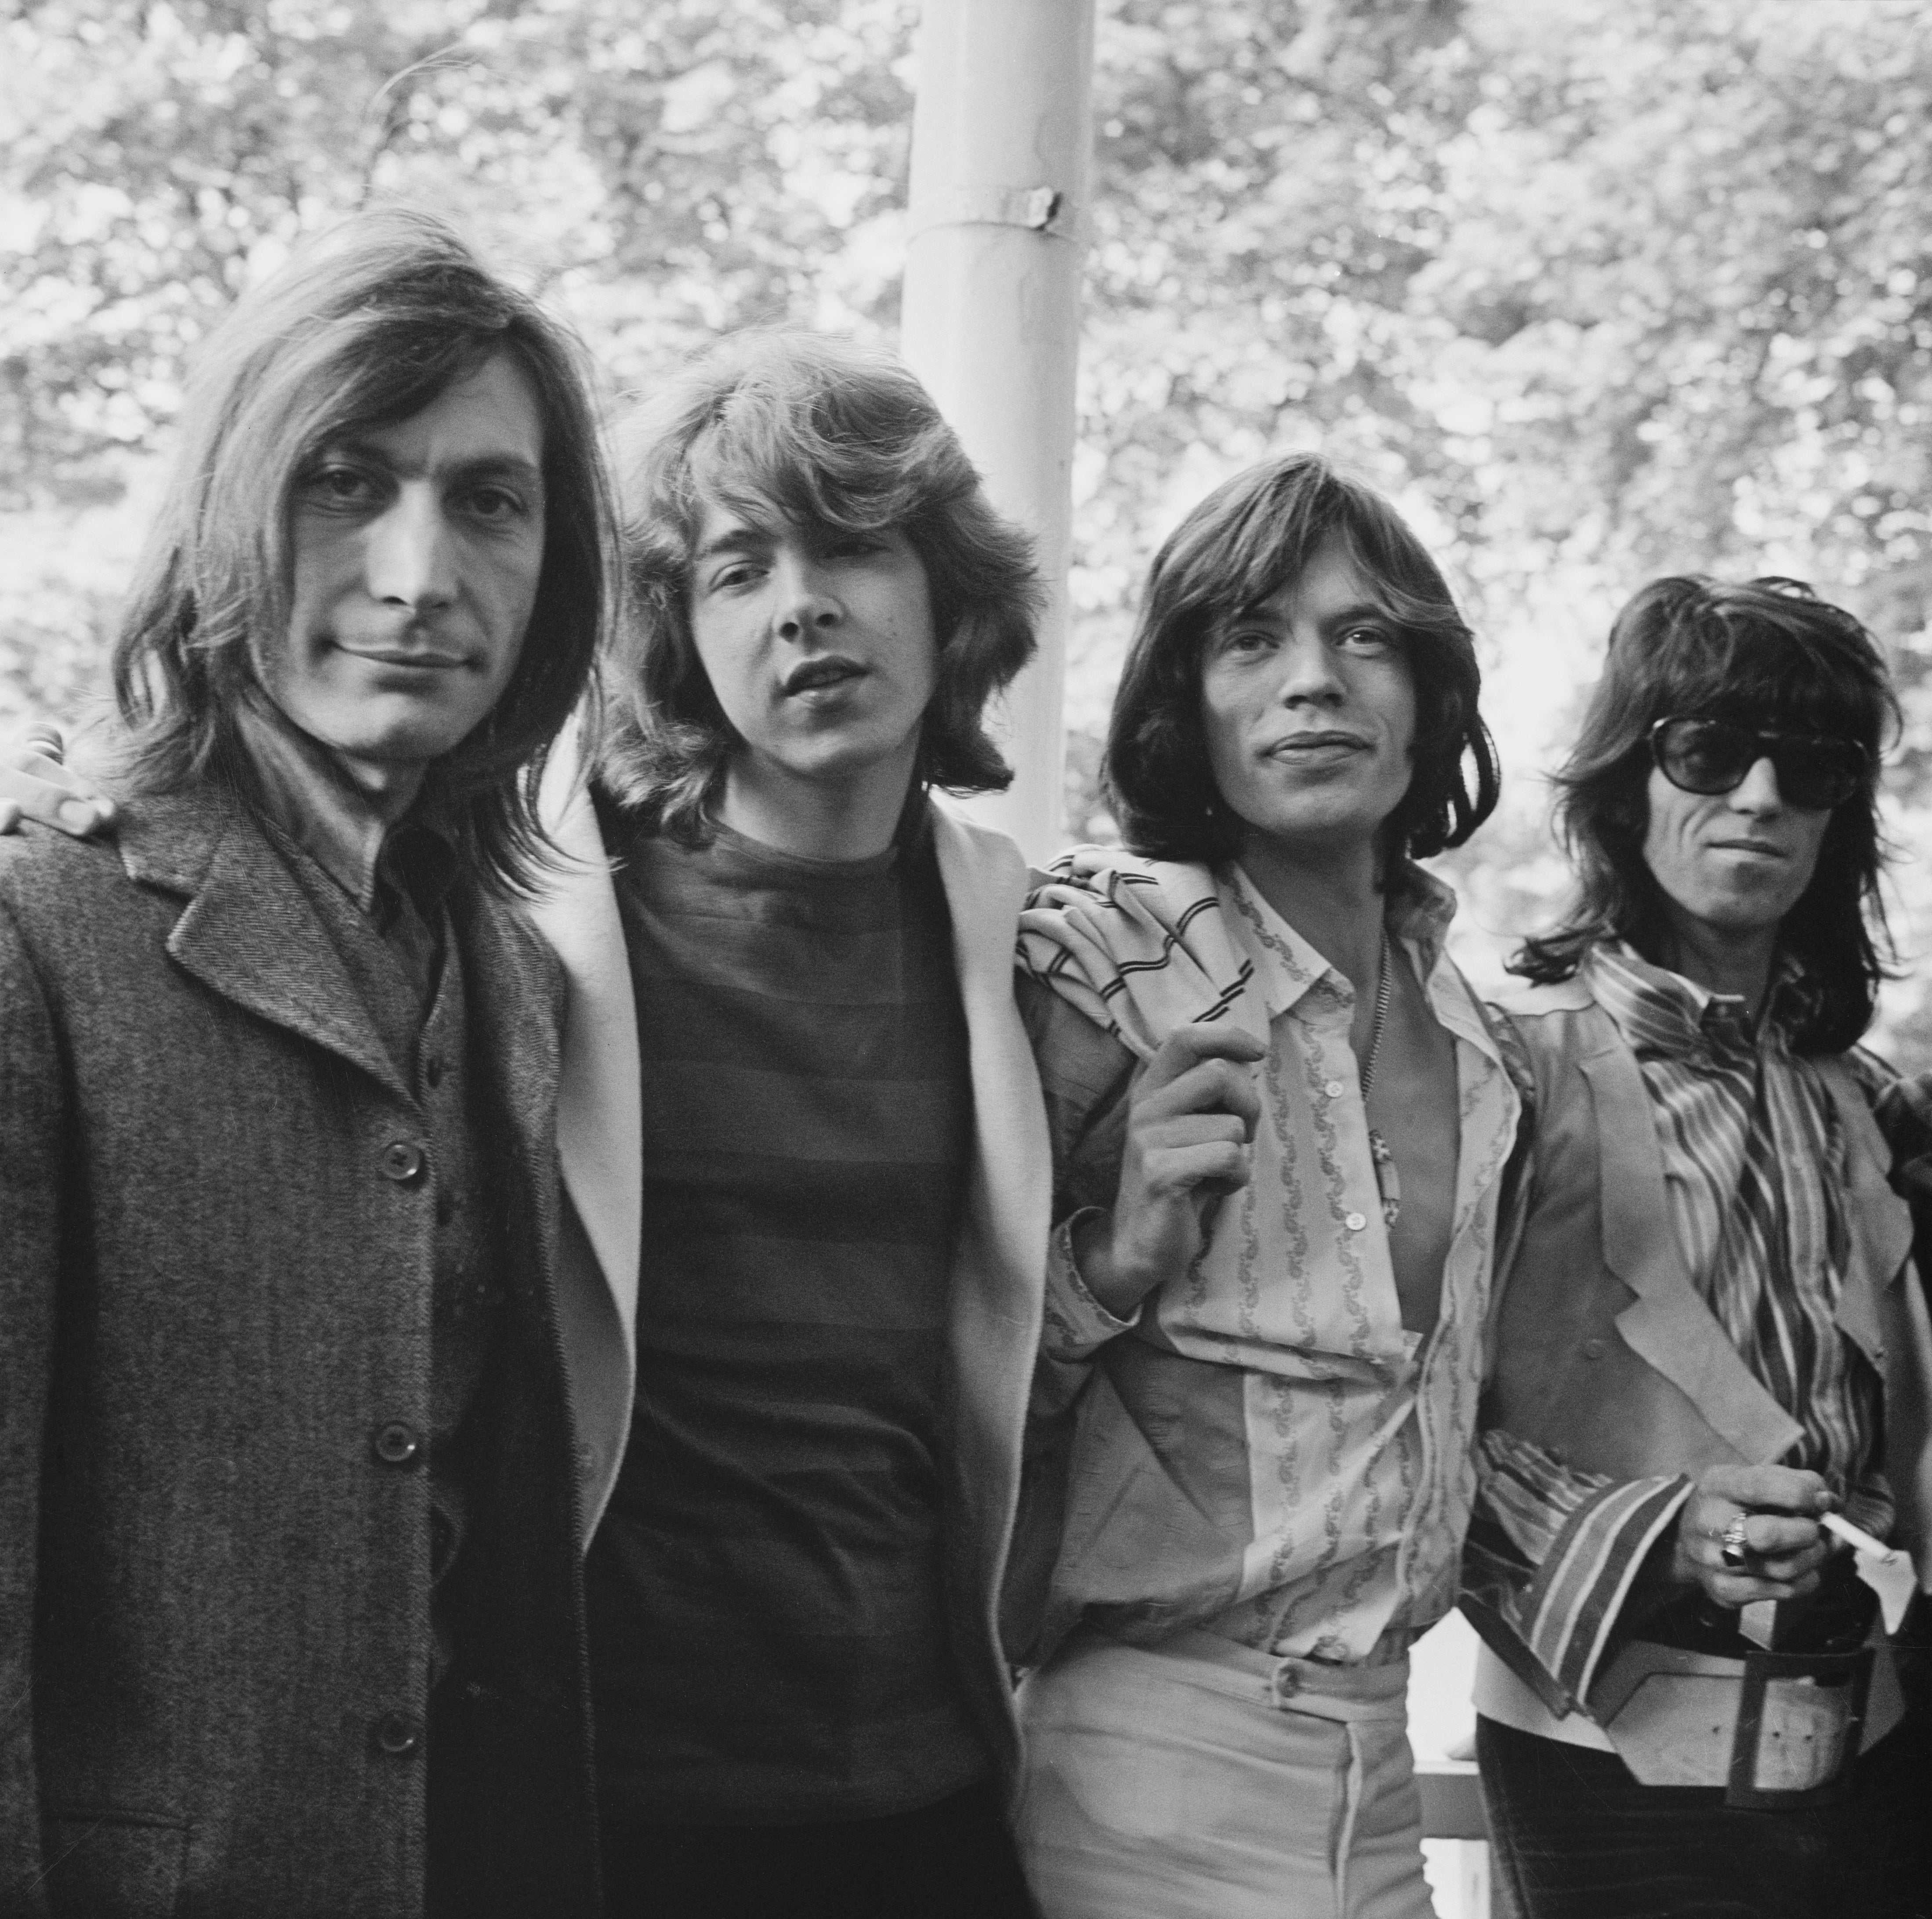 With Mick Taylor, Jagger and Richards prior to their Hyde Park concert on 13 June 1969